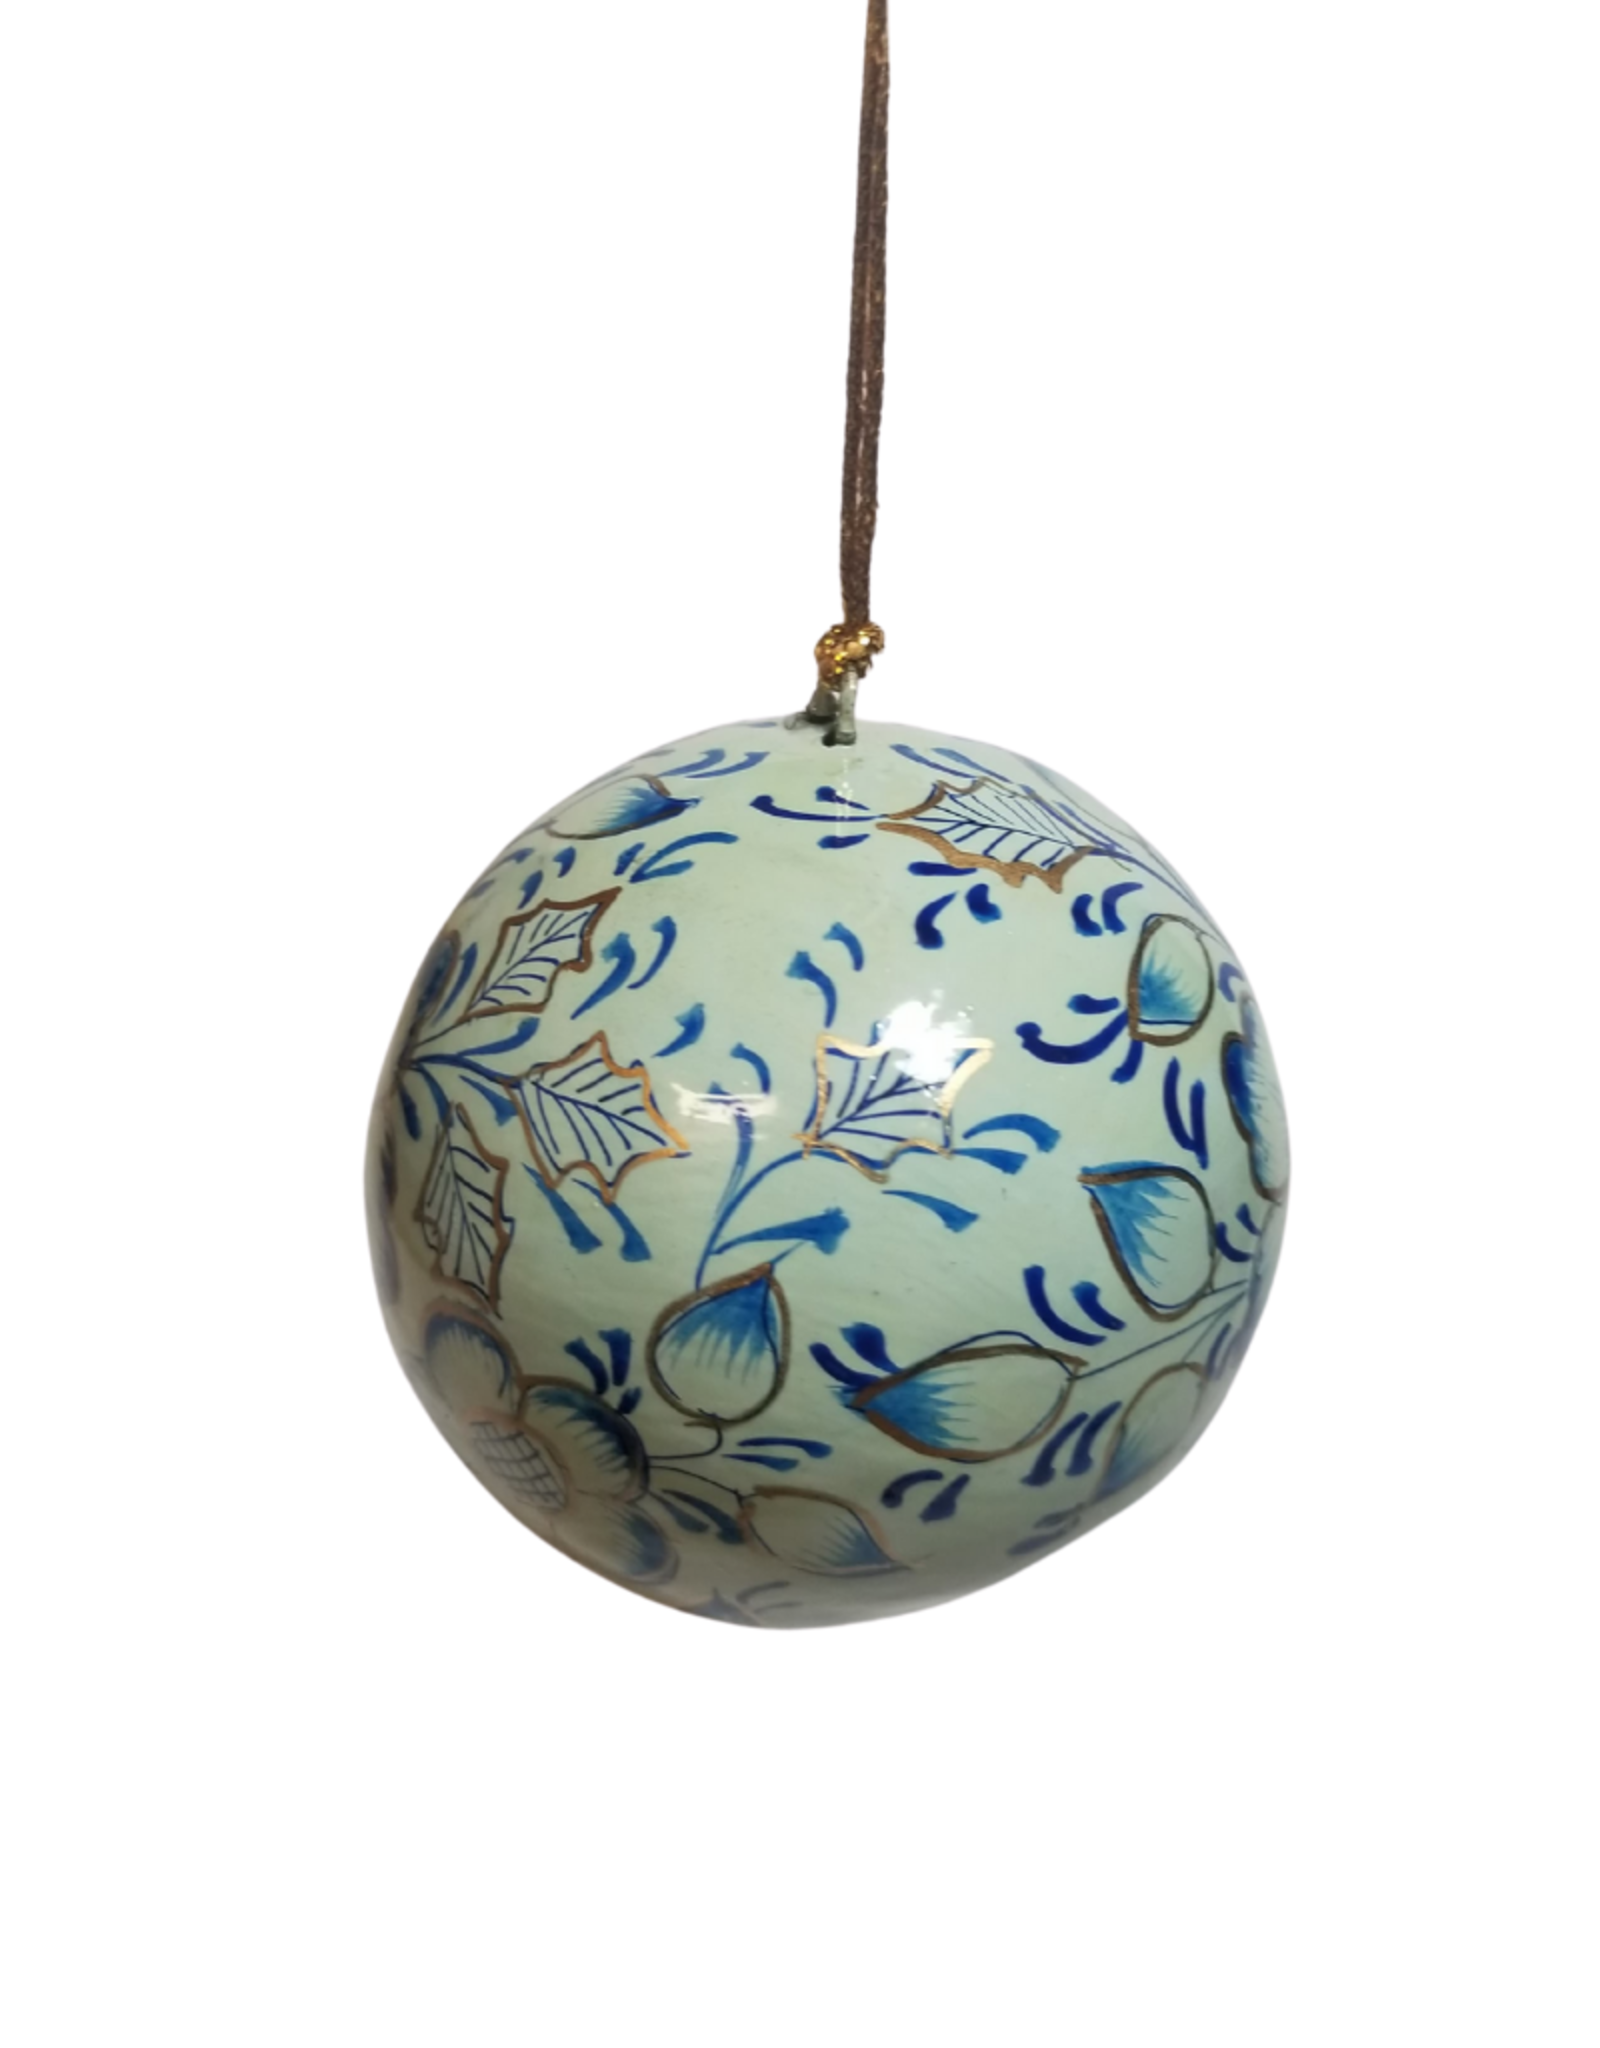 Global Crafts Ornament, Handpainted Blue Floral - India